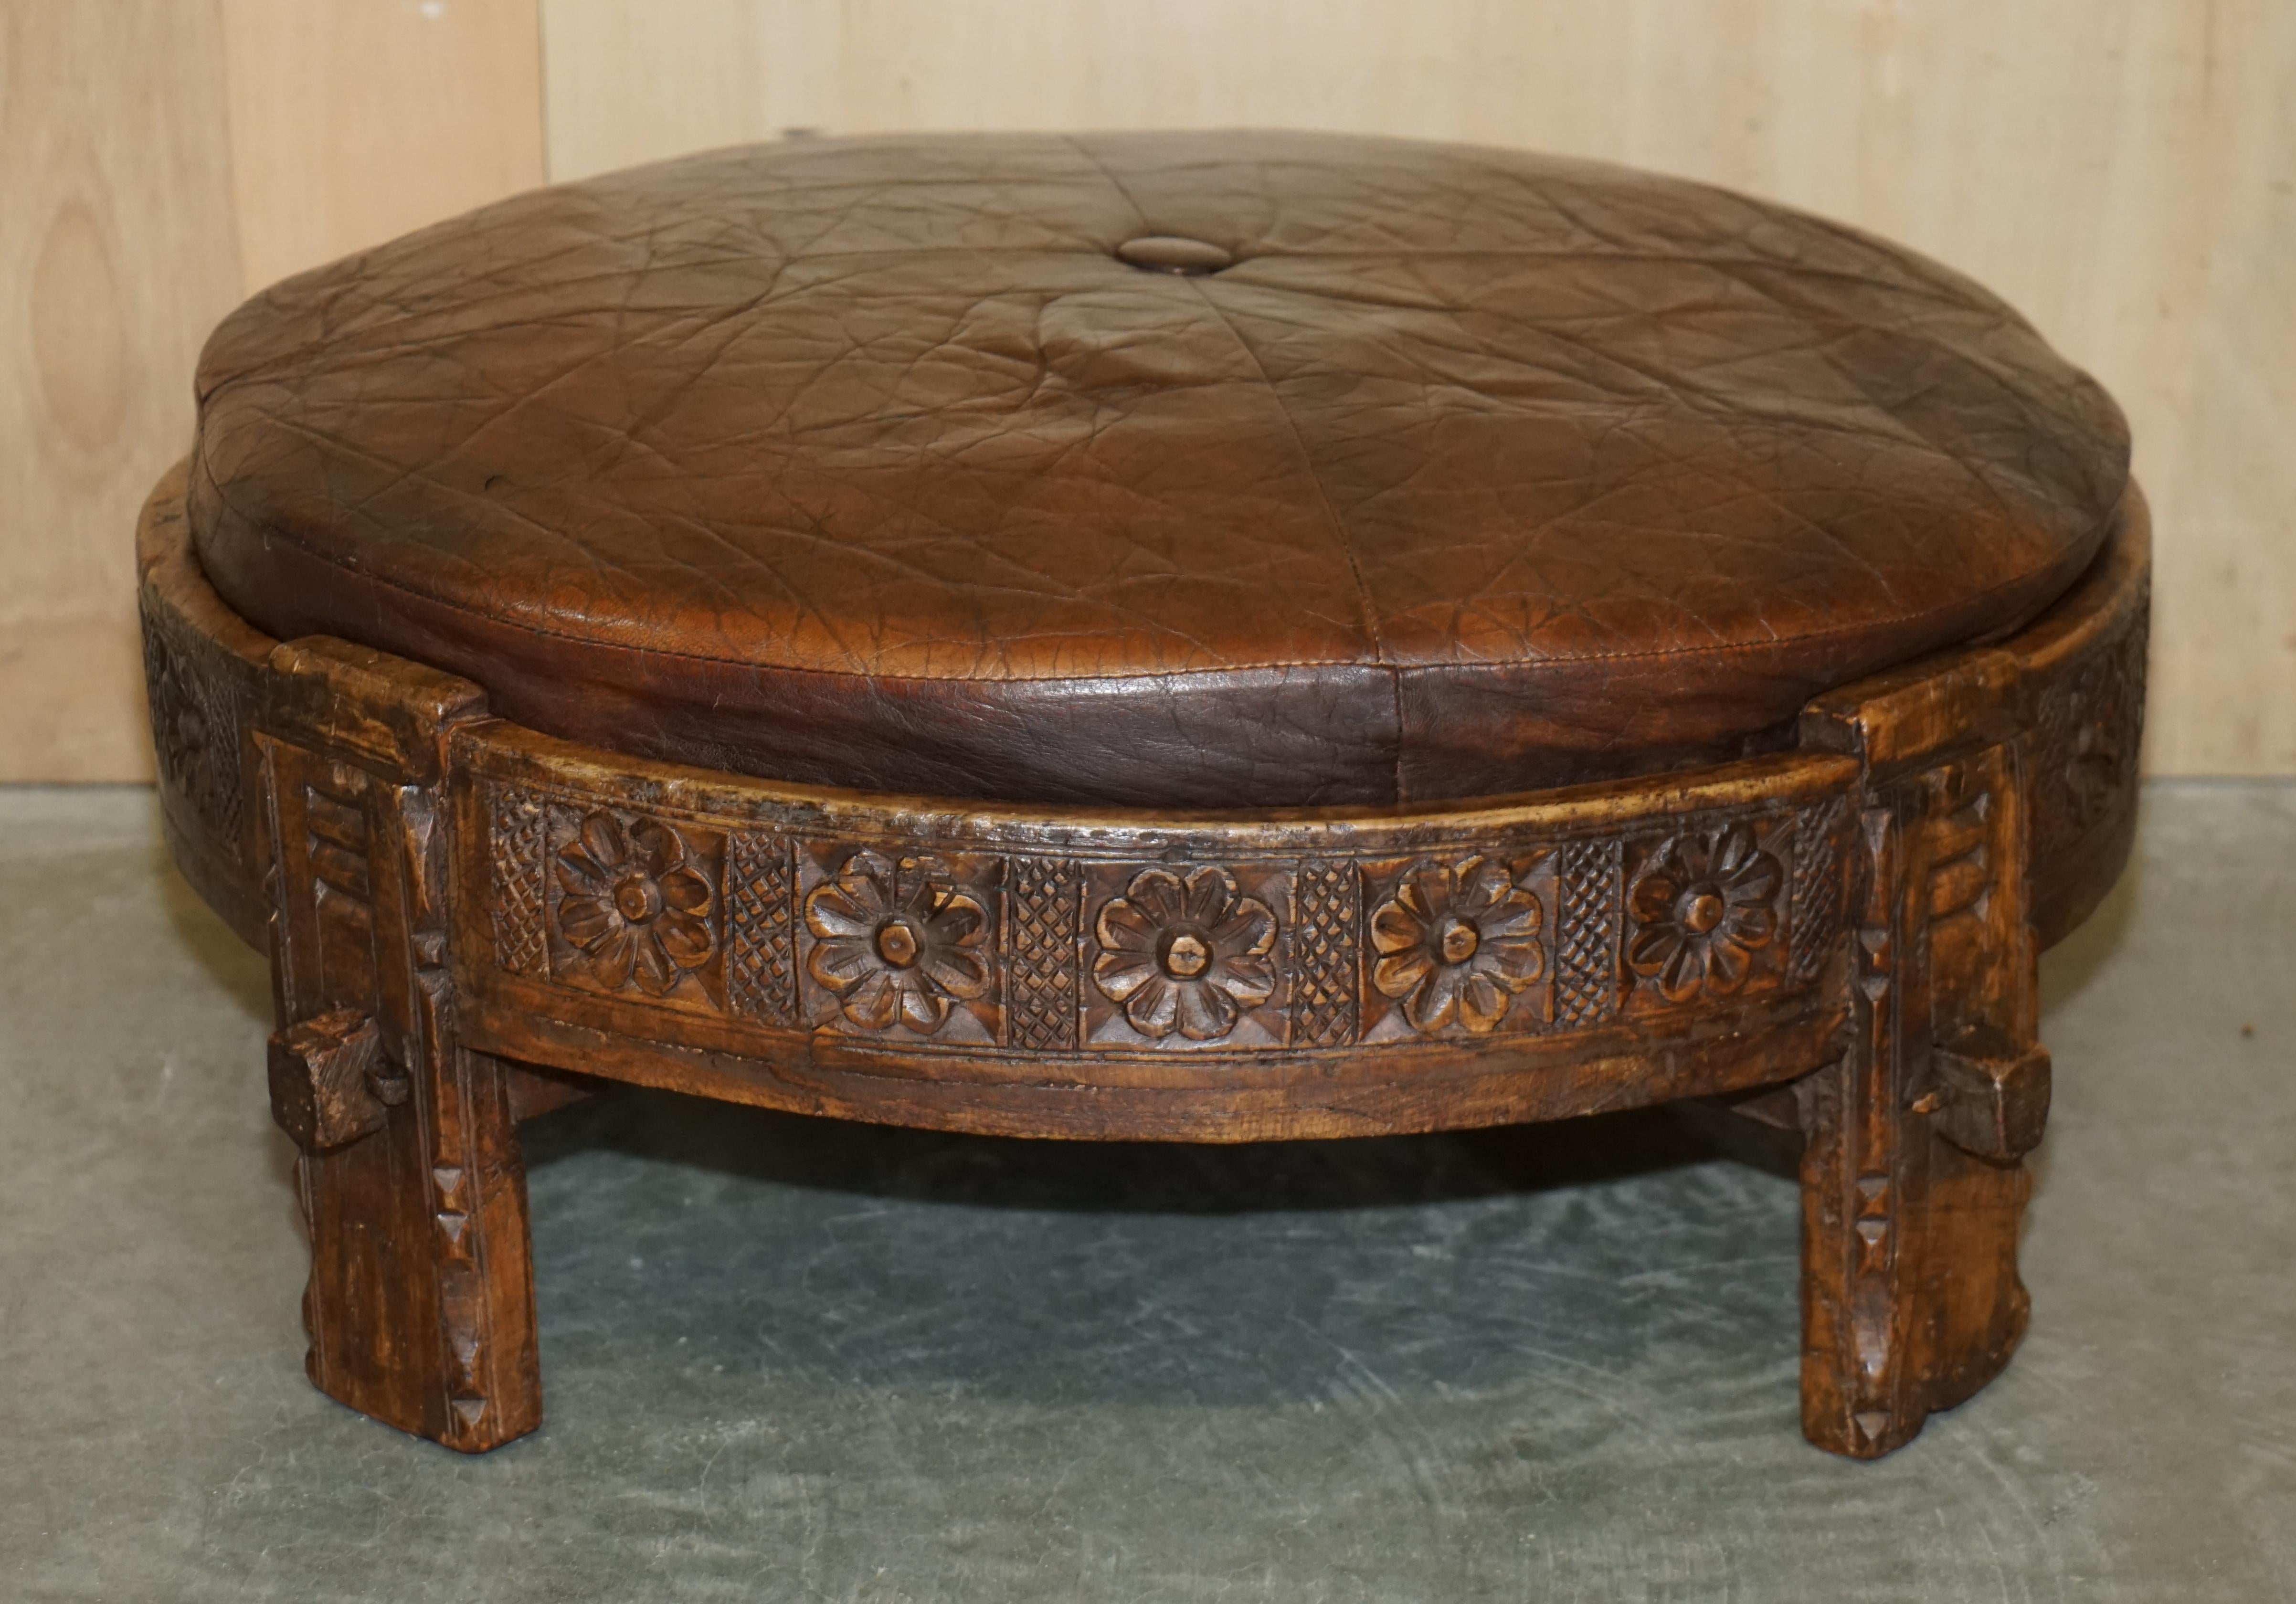 We are delighted to offer for sale this lovely circa 1850 hand carved solid hardwood Olive press which has been repurposed as a large footstool / ottoman

An expertly crafted piece, this is pure art furniture and looks amazing from every angle,